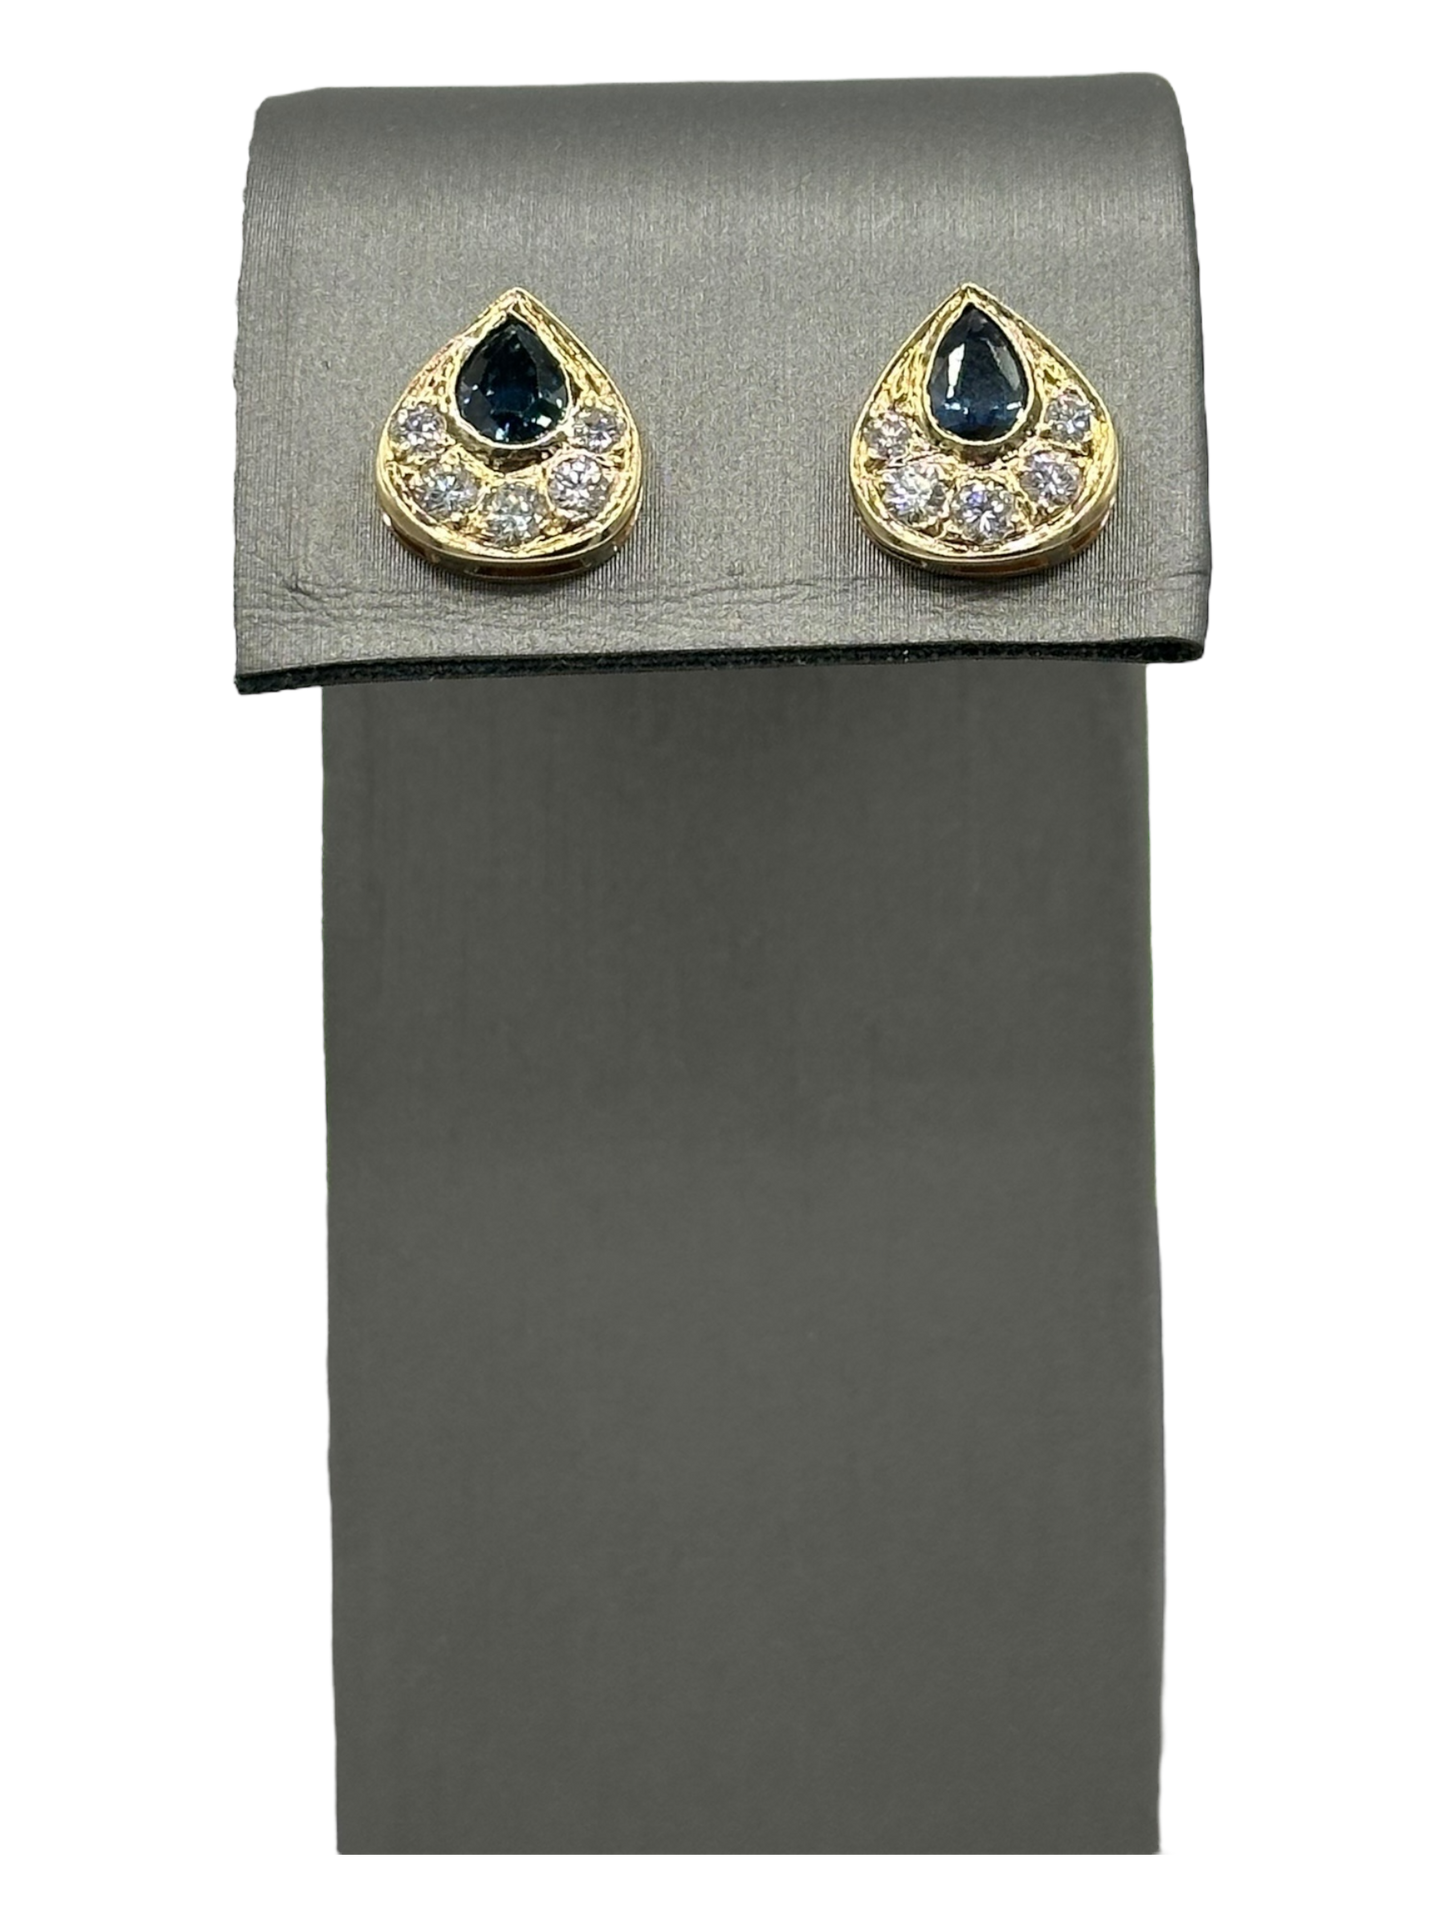 Victorian Style Tear Drop Studs With Pear Shape Sapphires & Diamonds